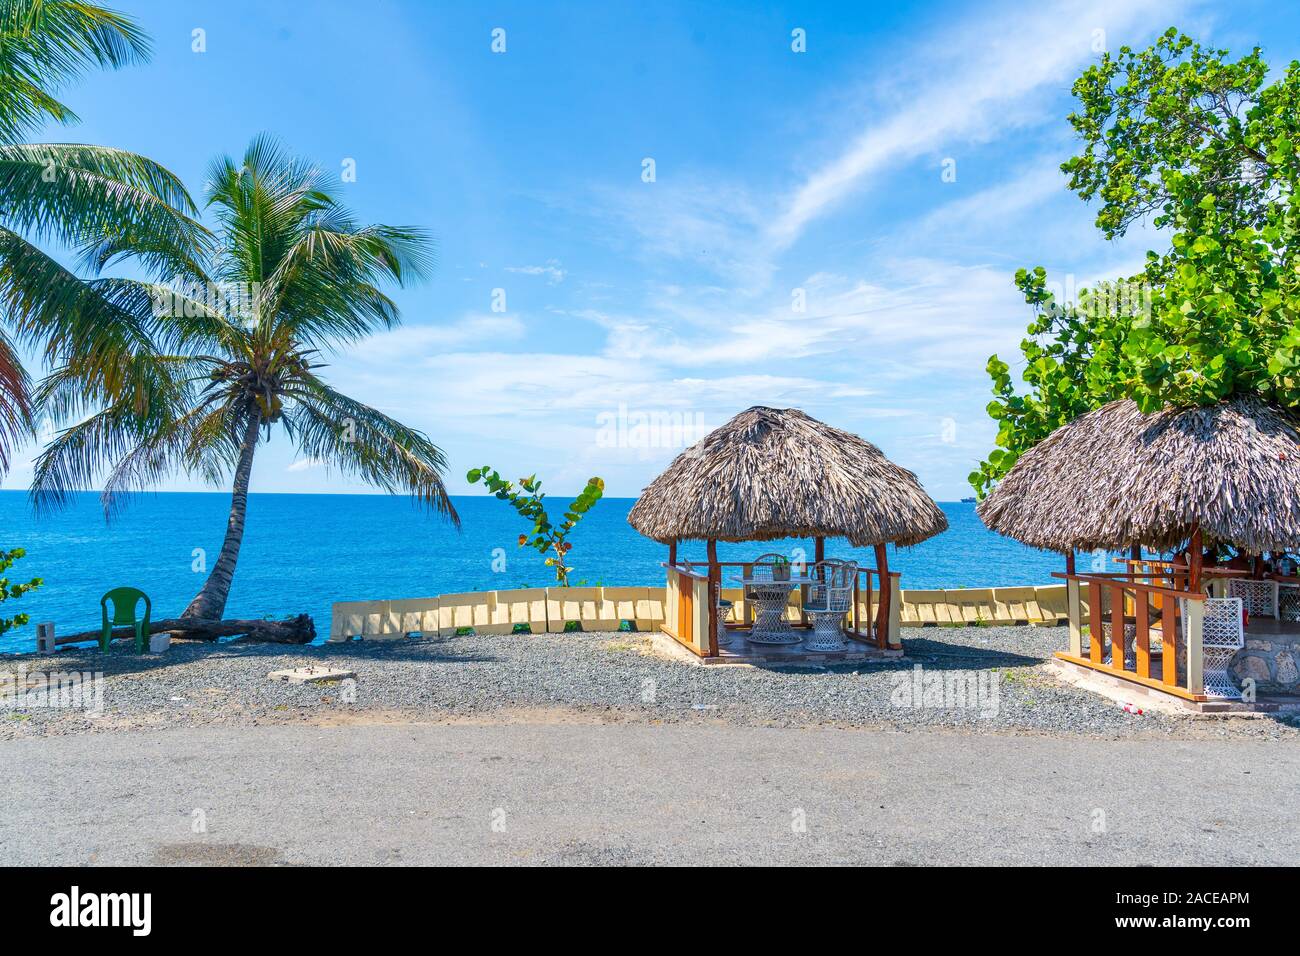 Tropical Scenic Views of the Ocean with Palm Trees and Huts from the Dominican Republic. Stock Photo